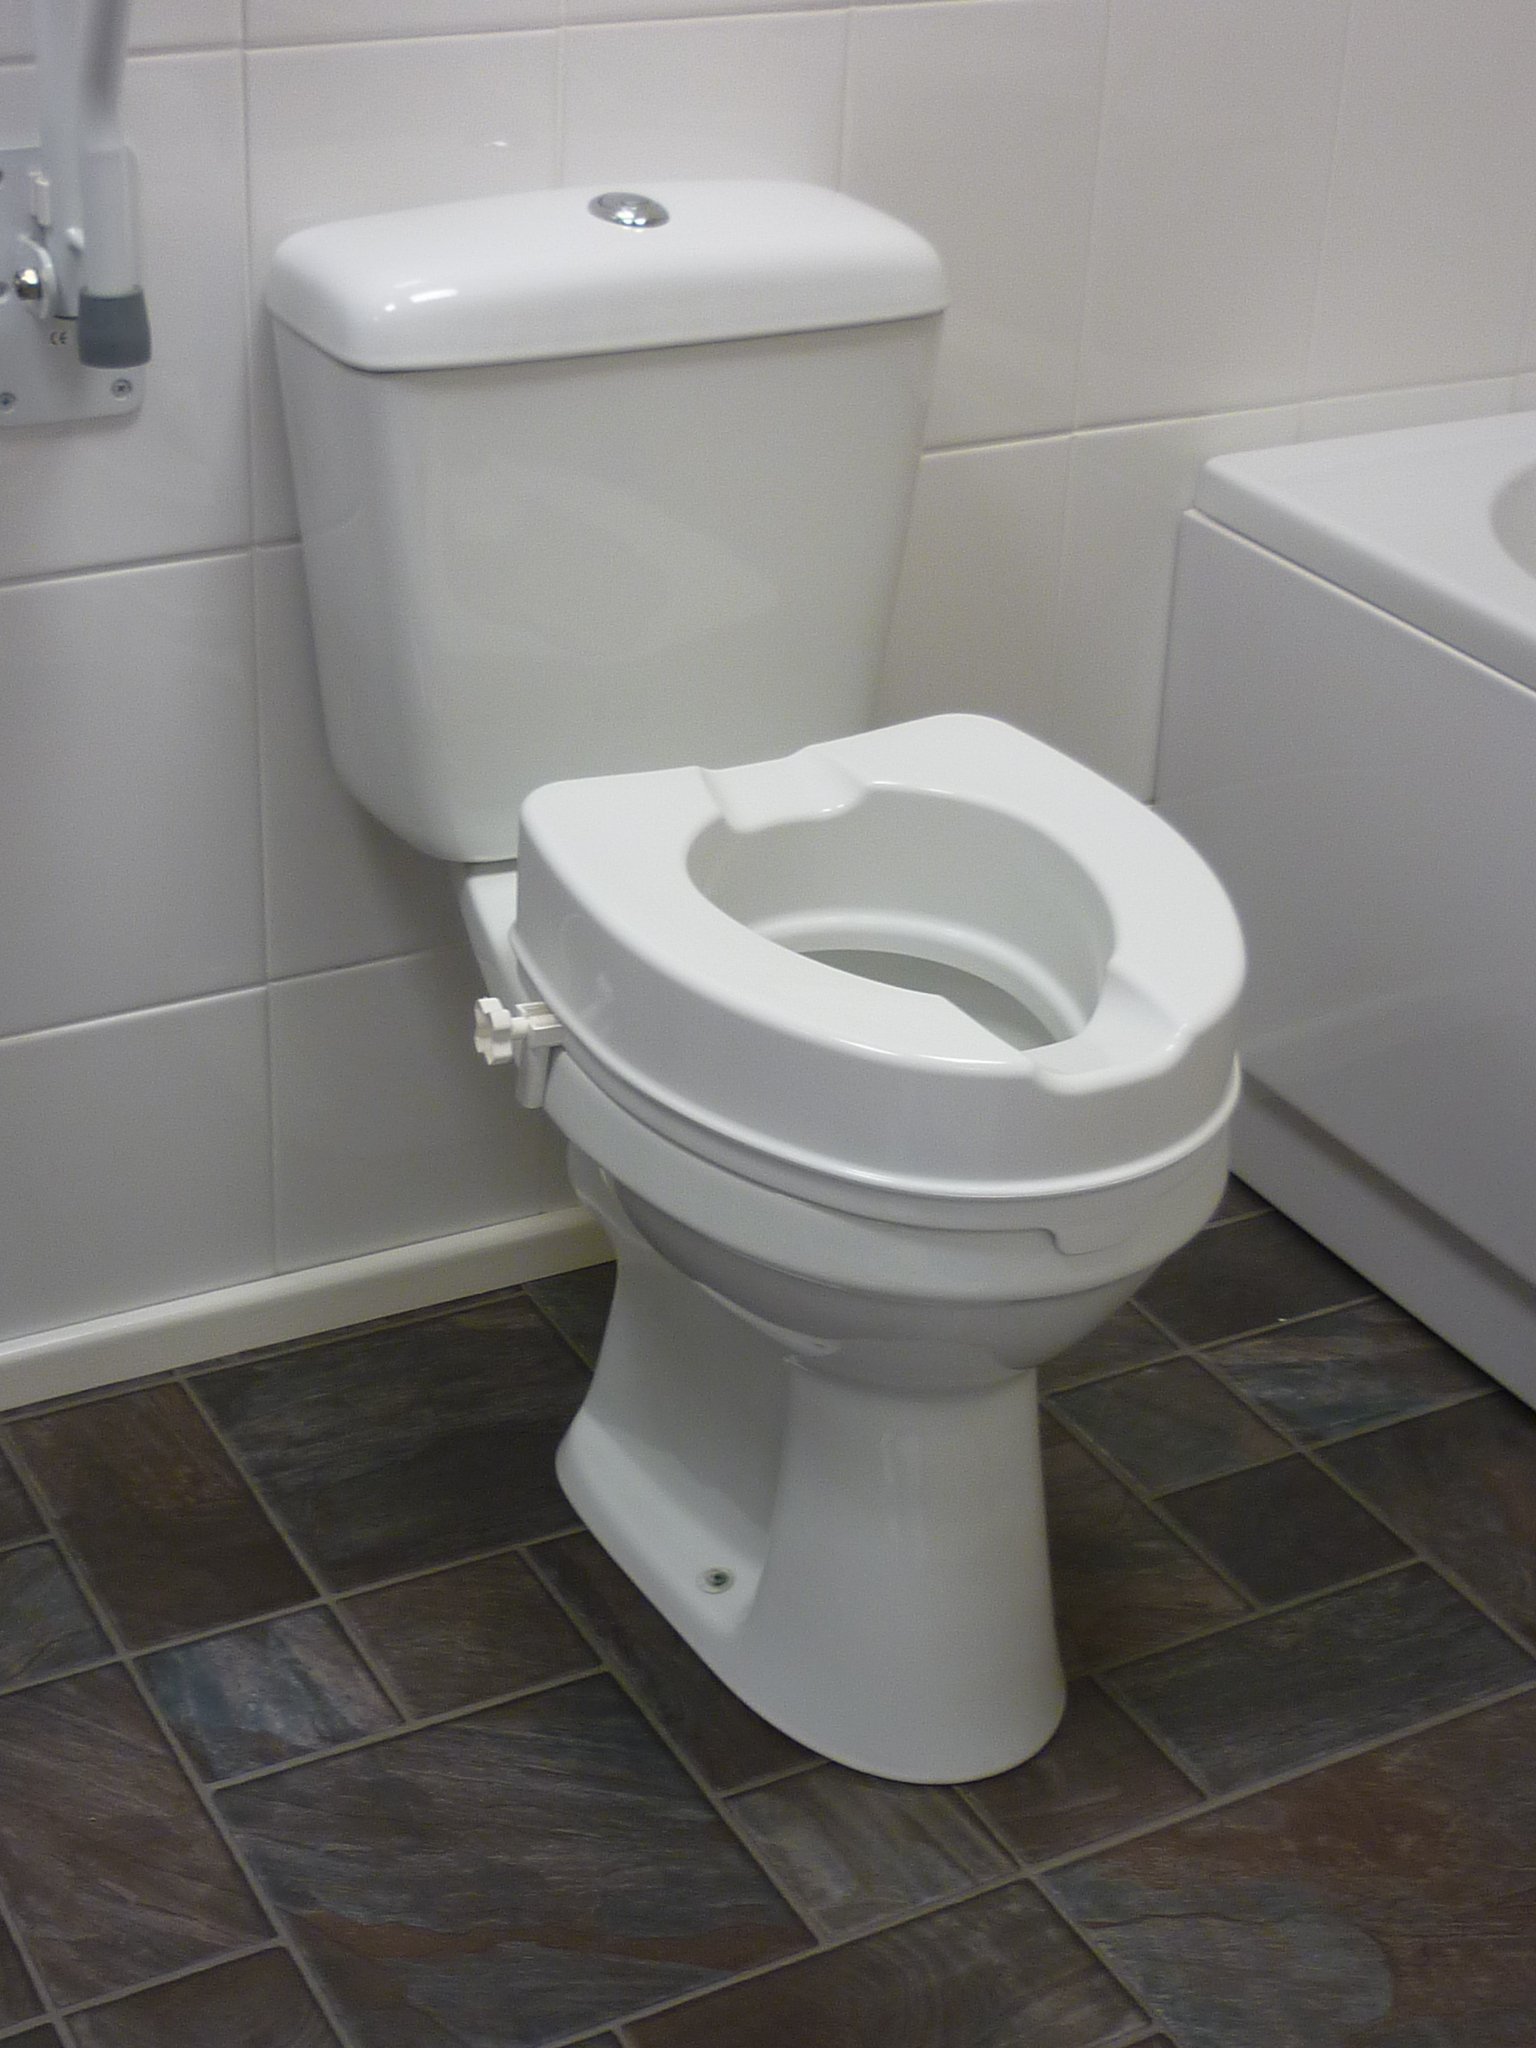 4 Inch Raised Toilet Seat without Lid review